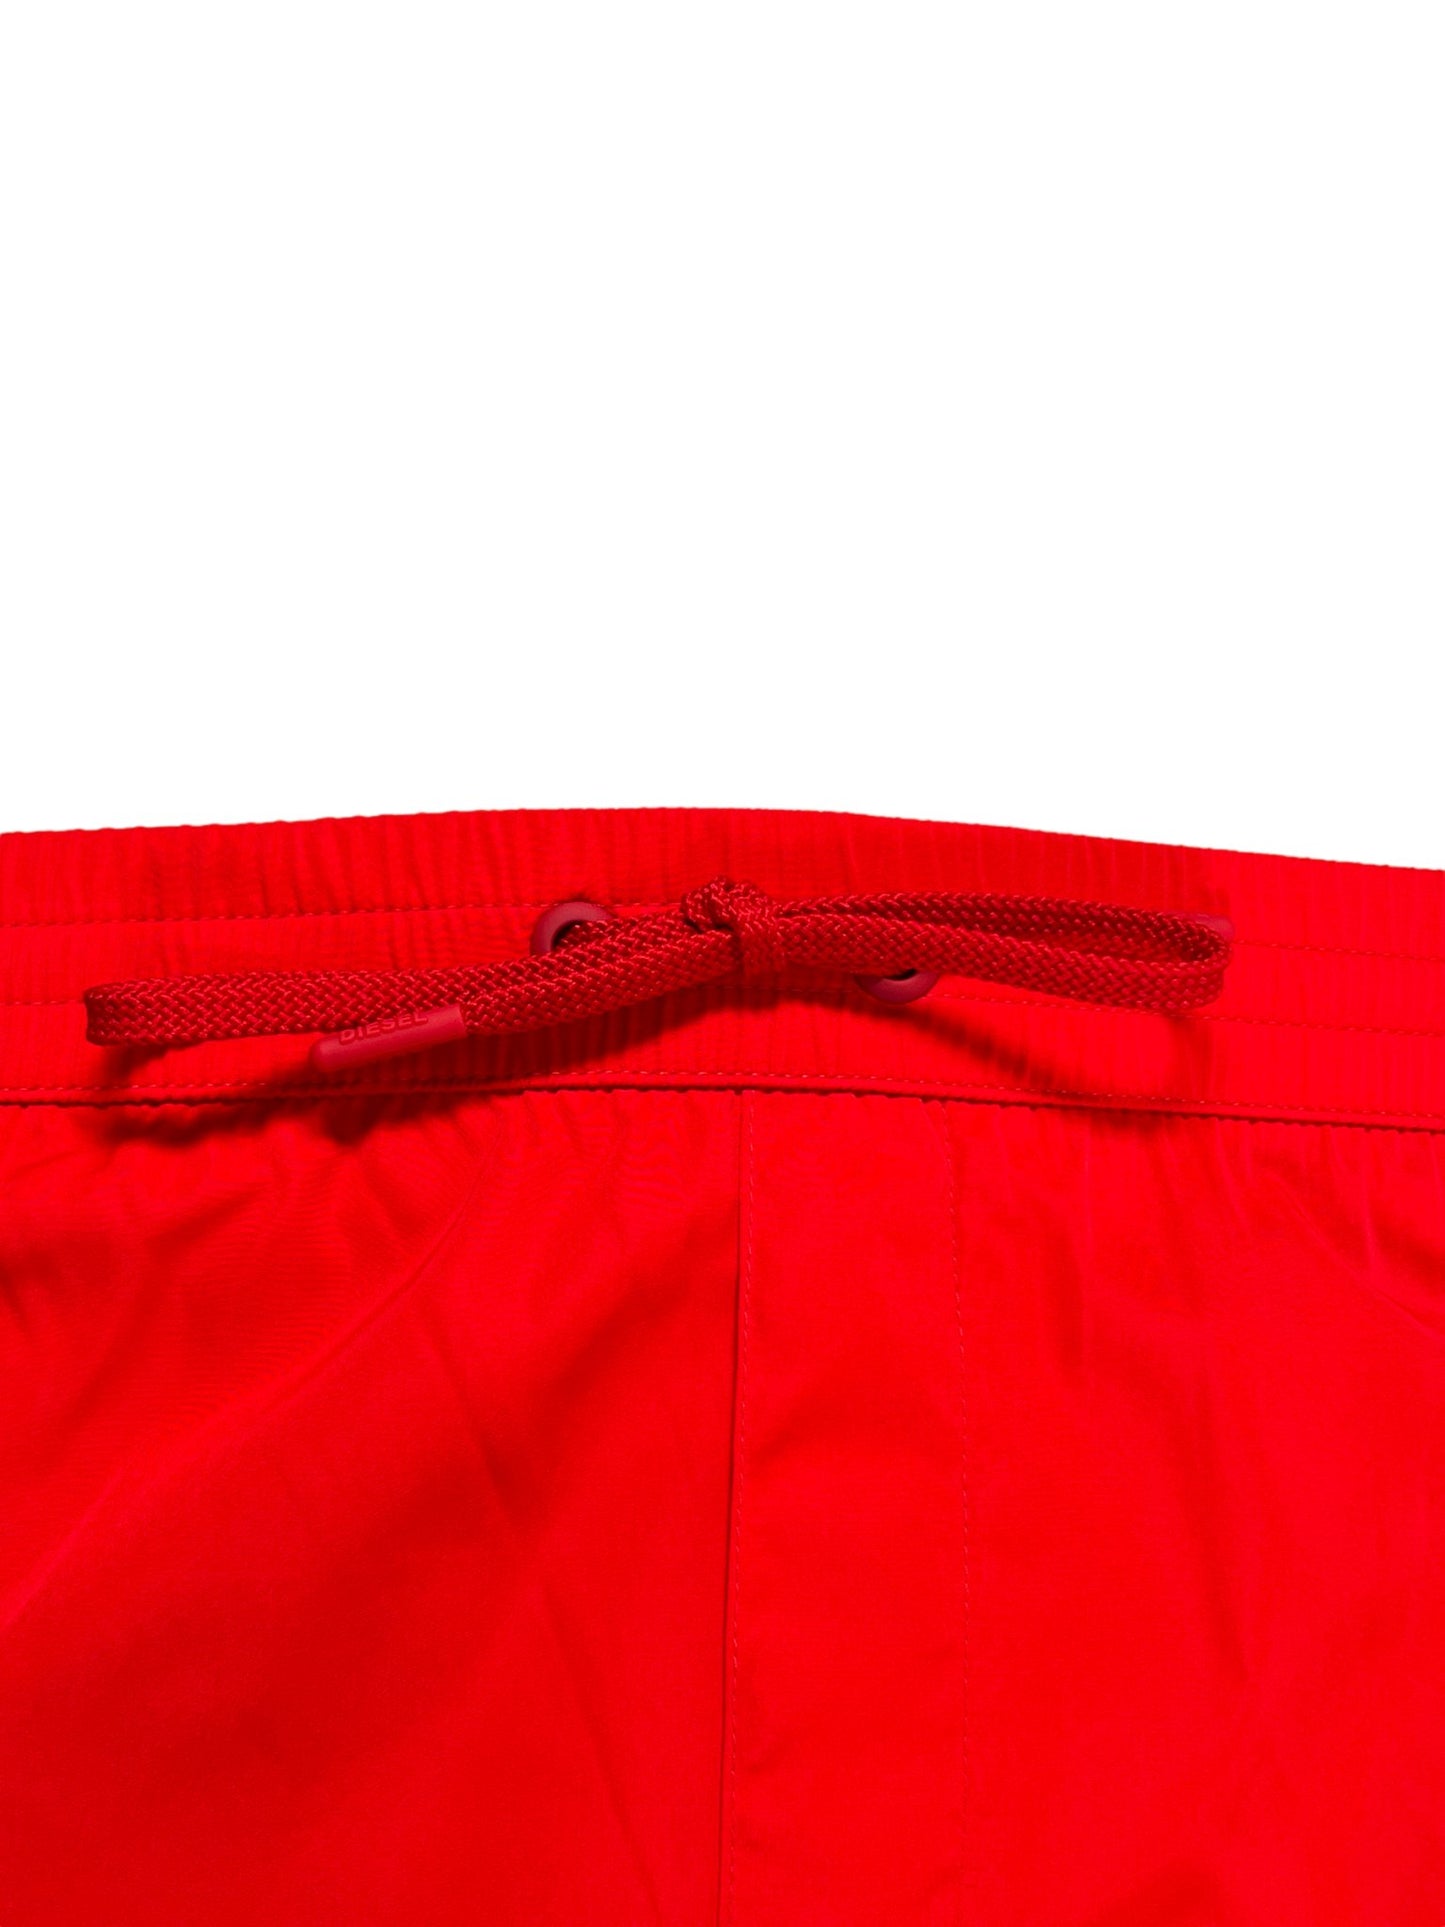 DIESEL men's swimming shorts with a drawstring on a white background.